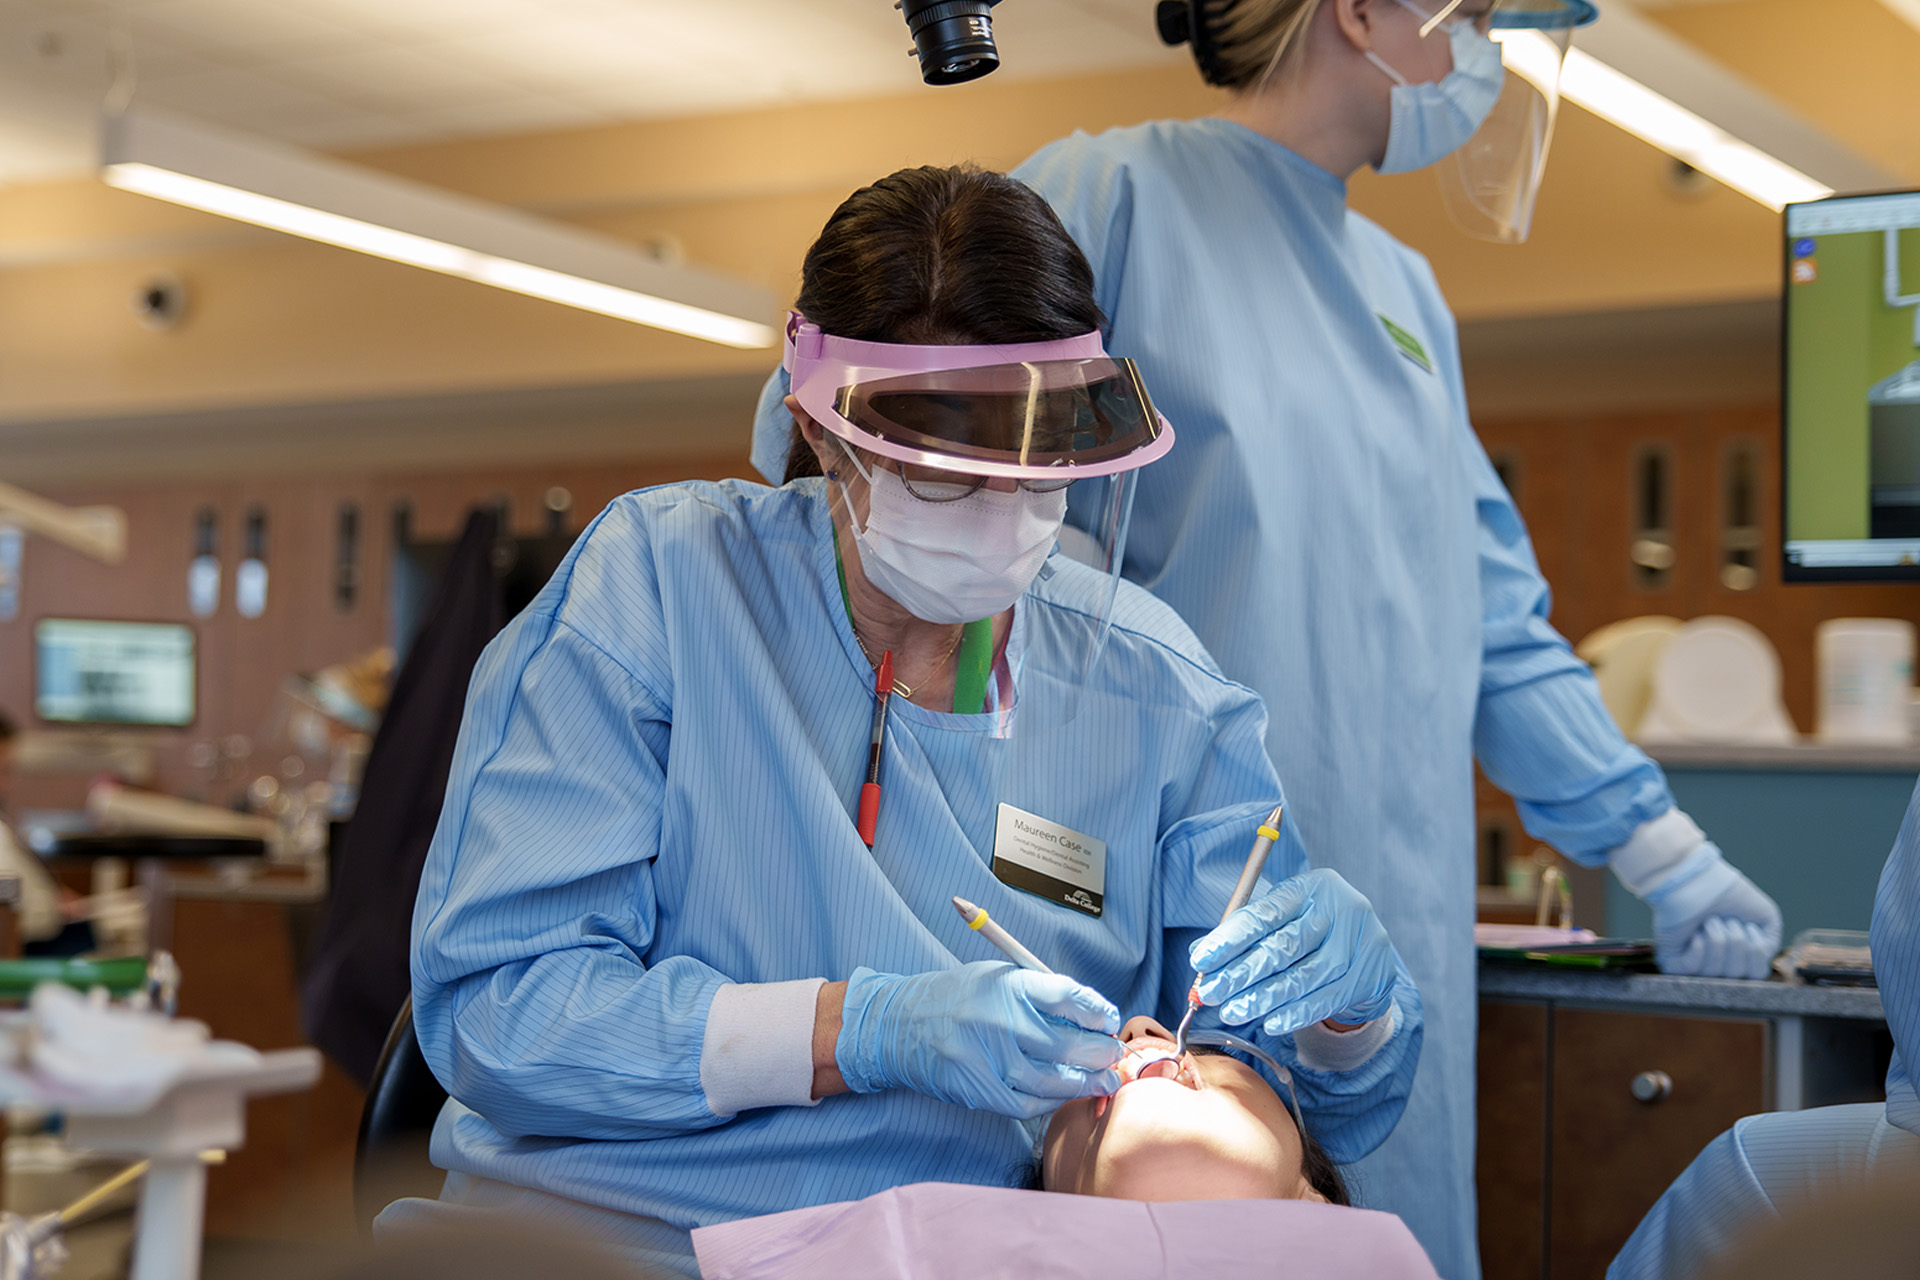 Students working in Dental lab